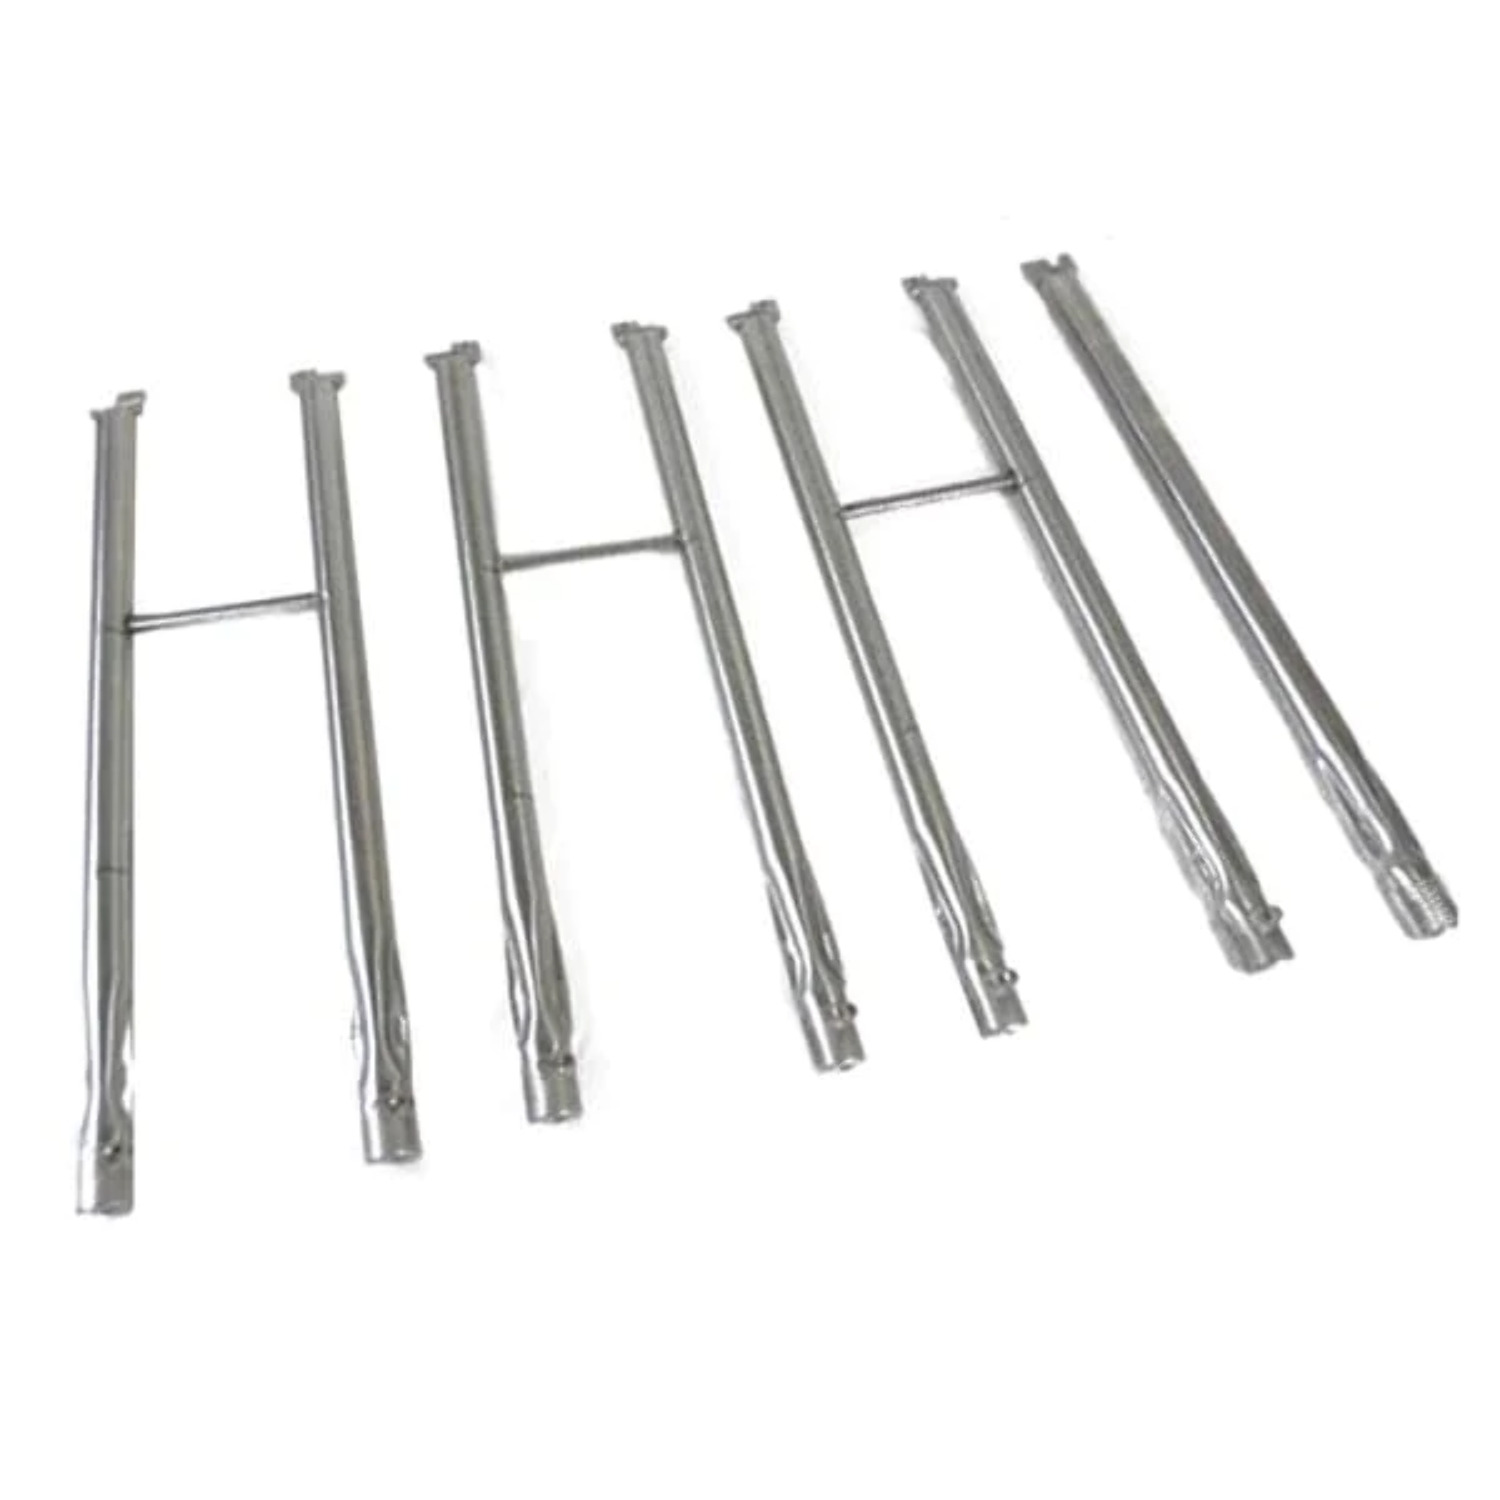 BBQ Grill Compatible With Weber Grills 6-Pack SS Burner  Smoker Set (Plus 3 Crossover Burner Tubes) BCP85663 - image 2 of 4